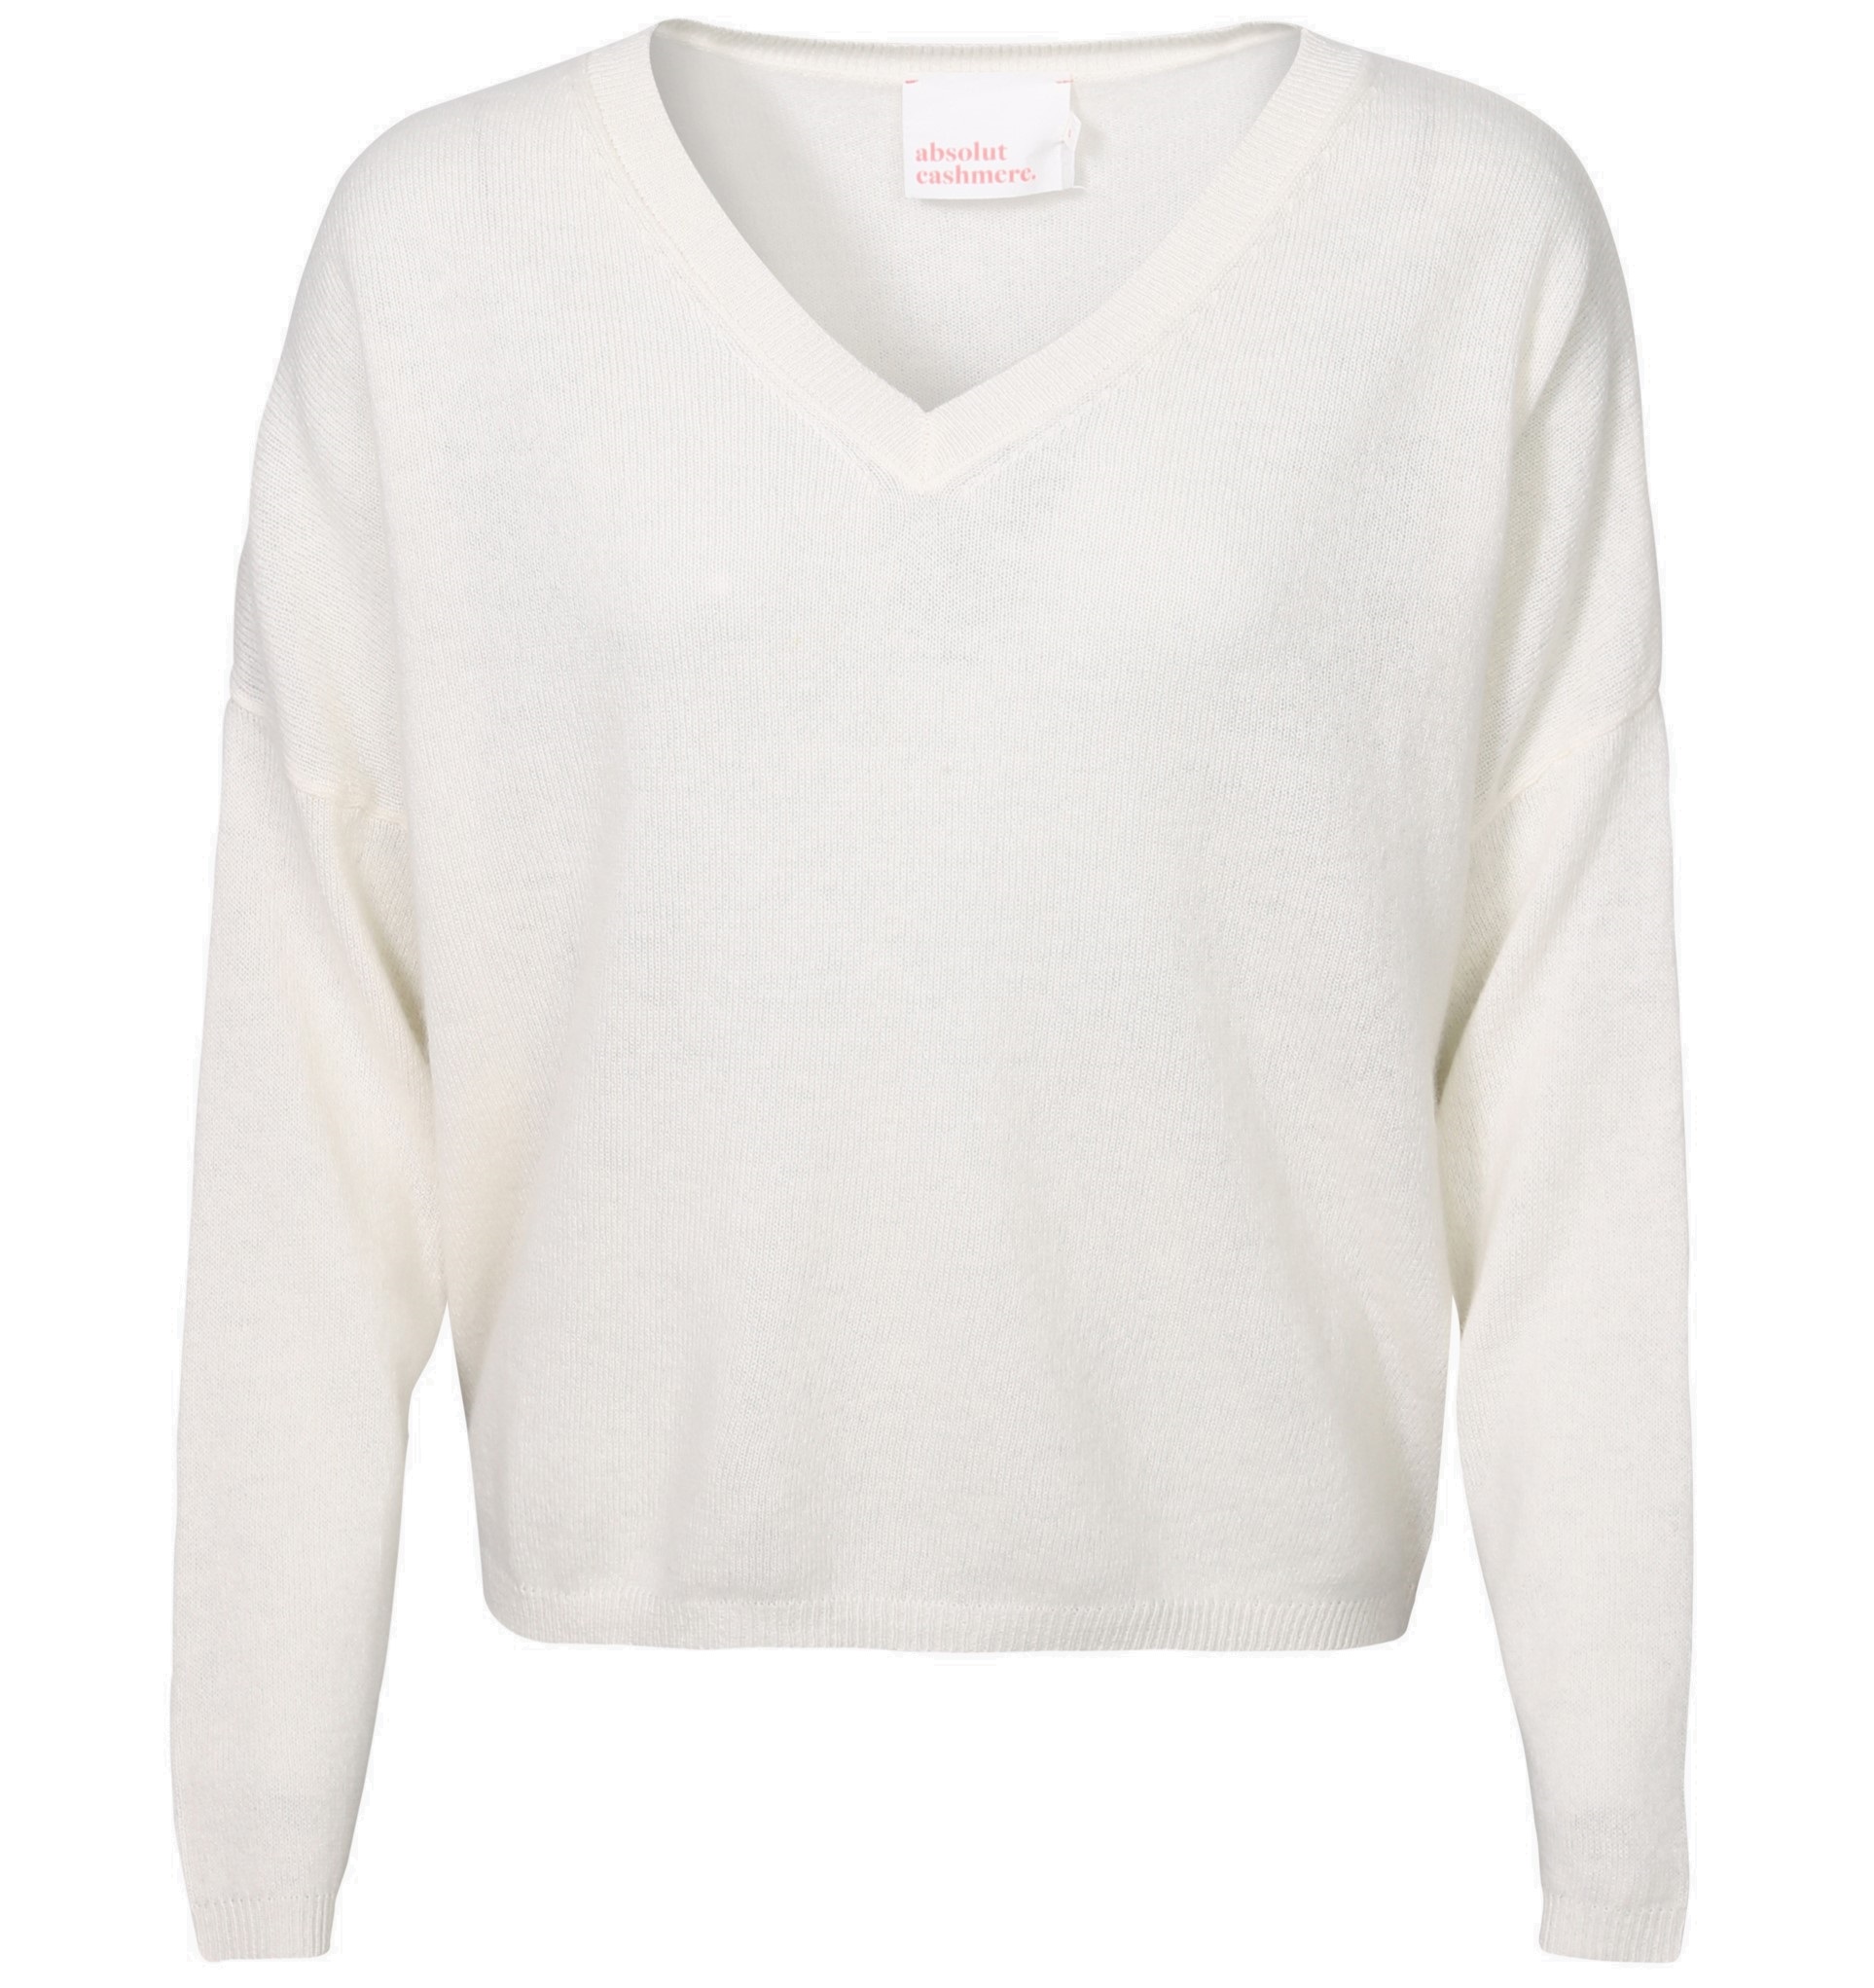 ABSOLUT CASHMERE V-Neck Sweater Alicia in Offwhite